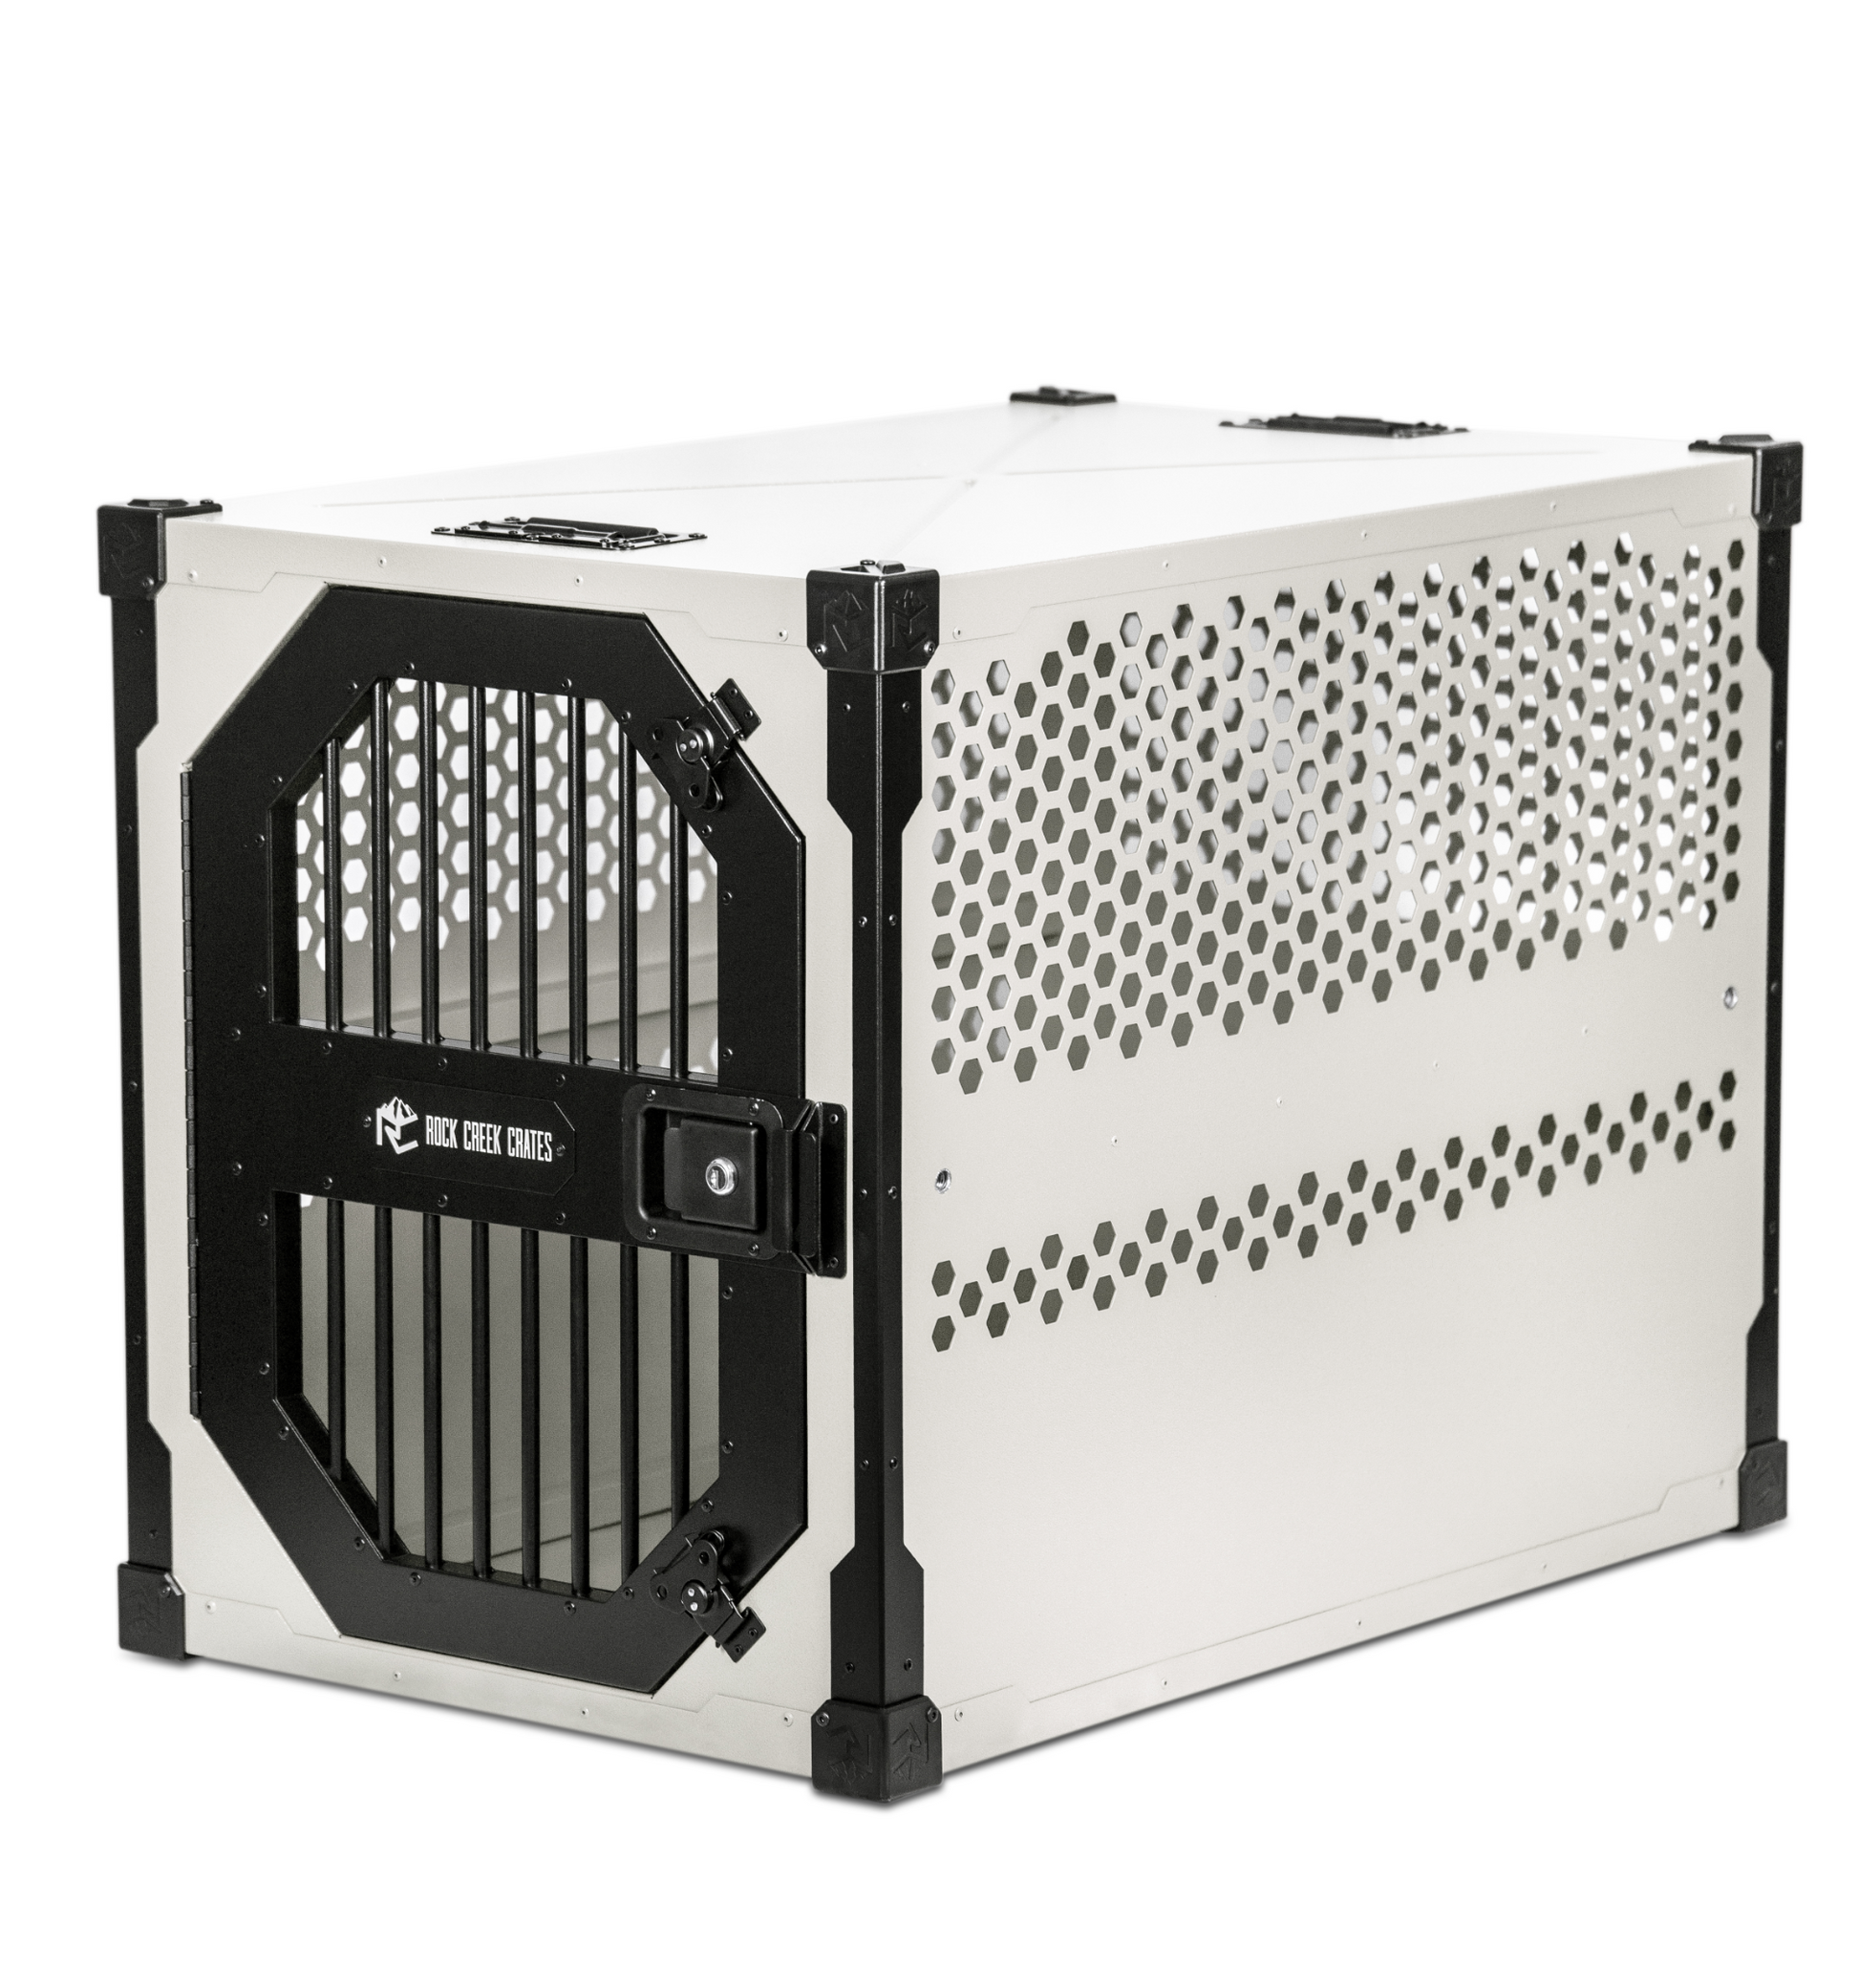 White Snowfall Stationary dog crate by Rock Creek Crates